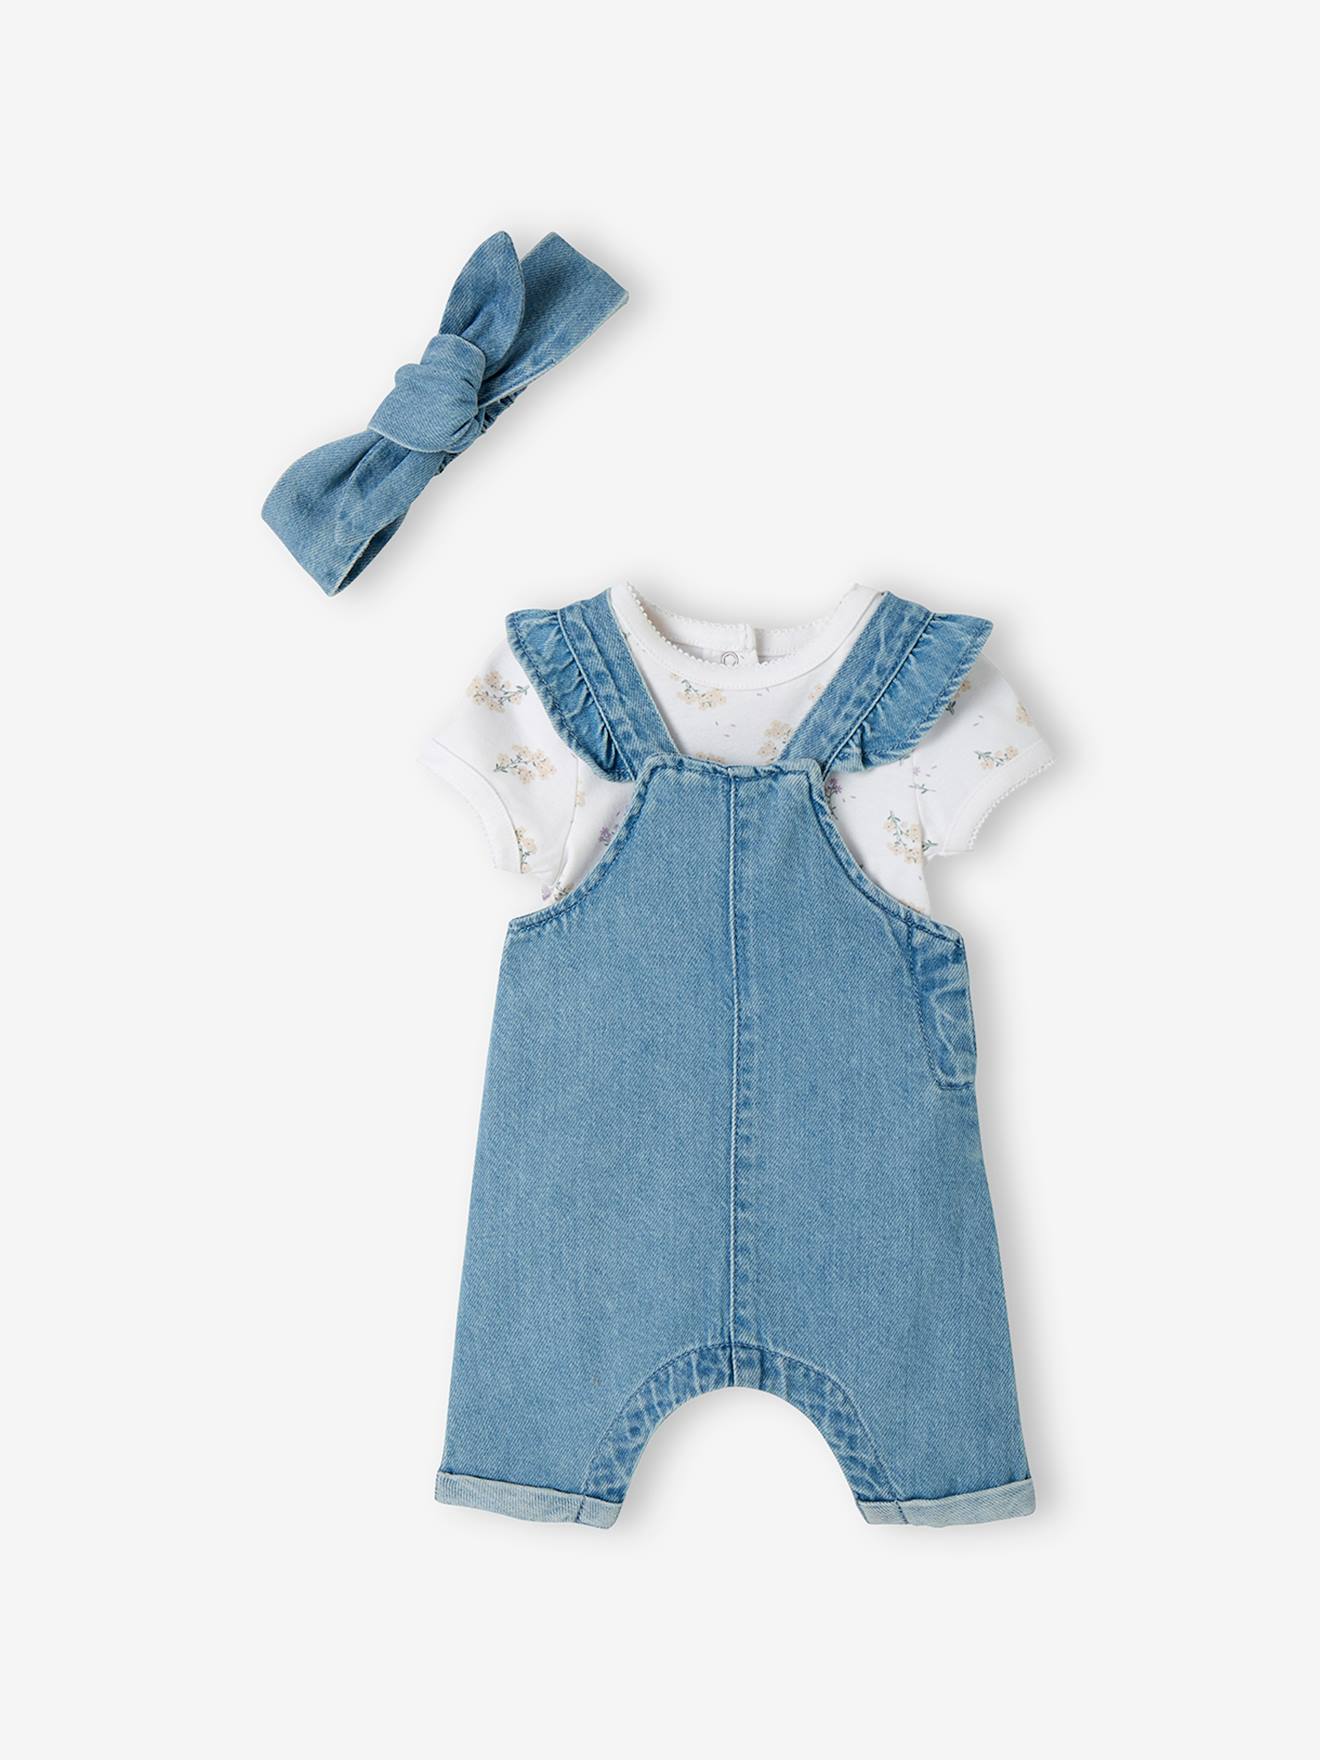 Baby Boys Blue Knitted Star Dungarees & White Long Sleeve Bodysuit Outfit Set 